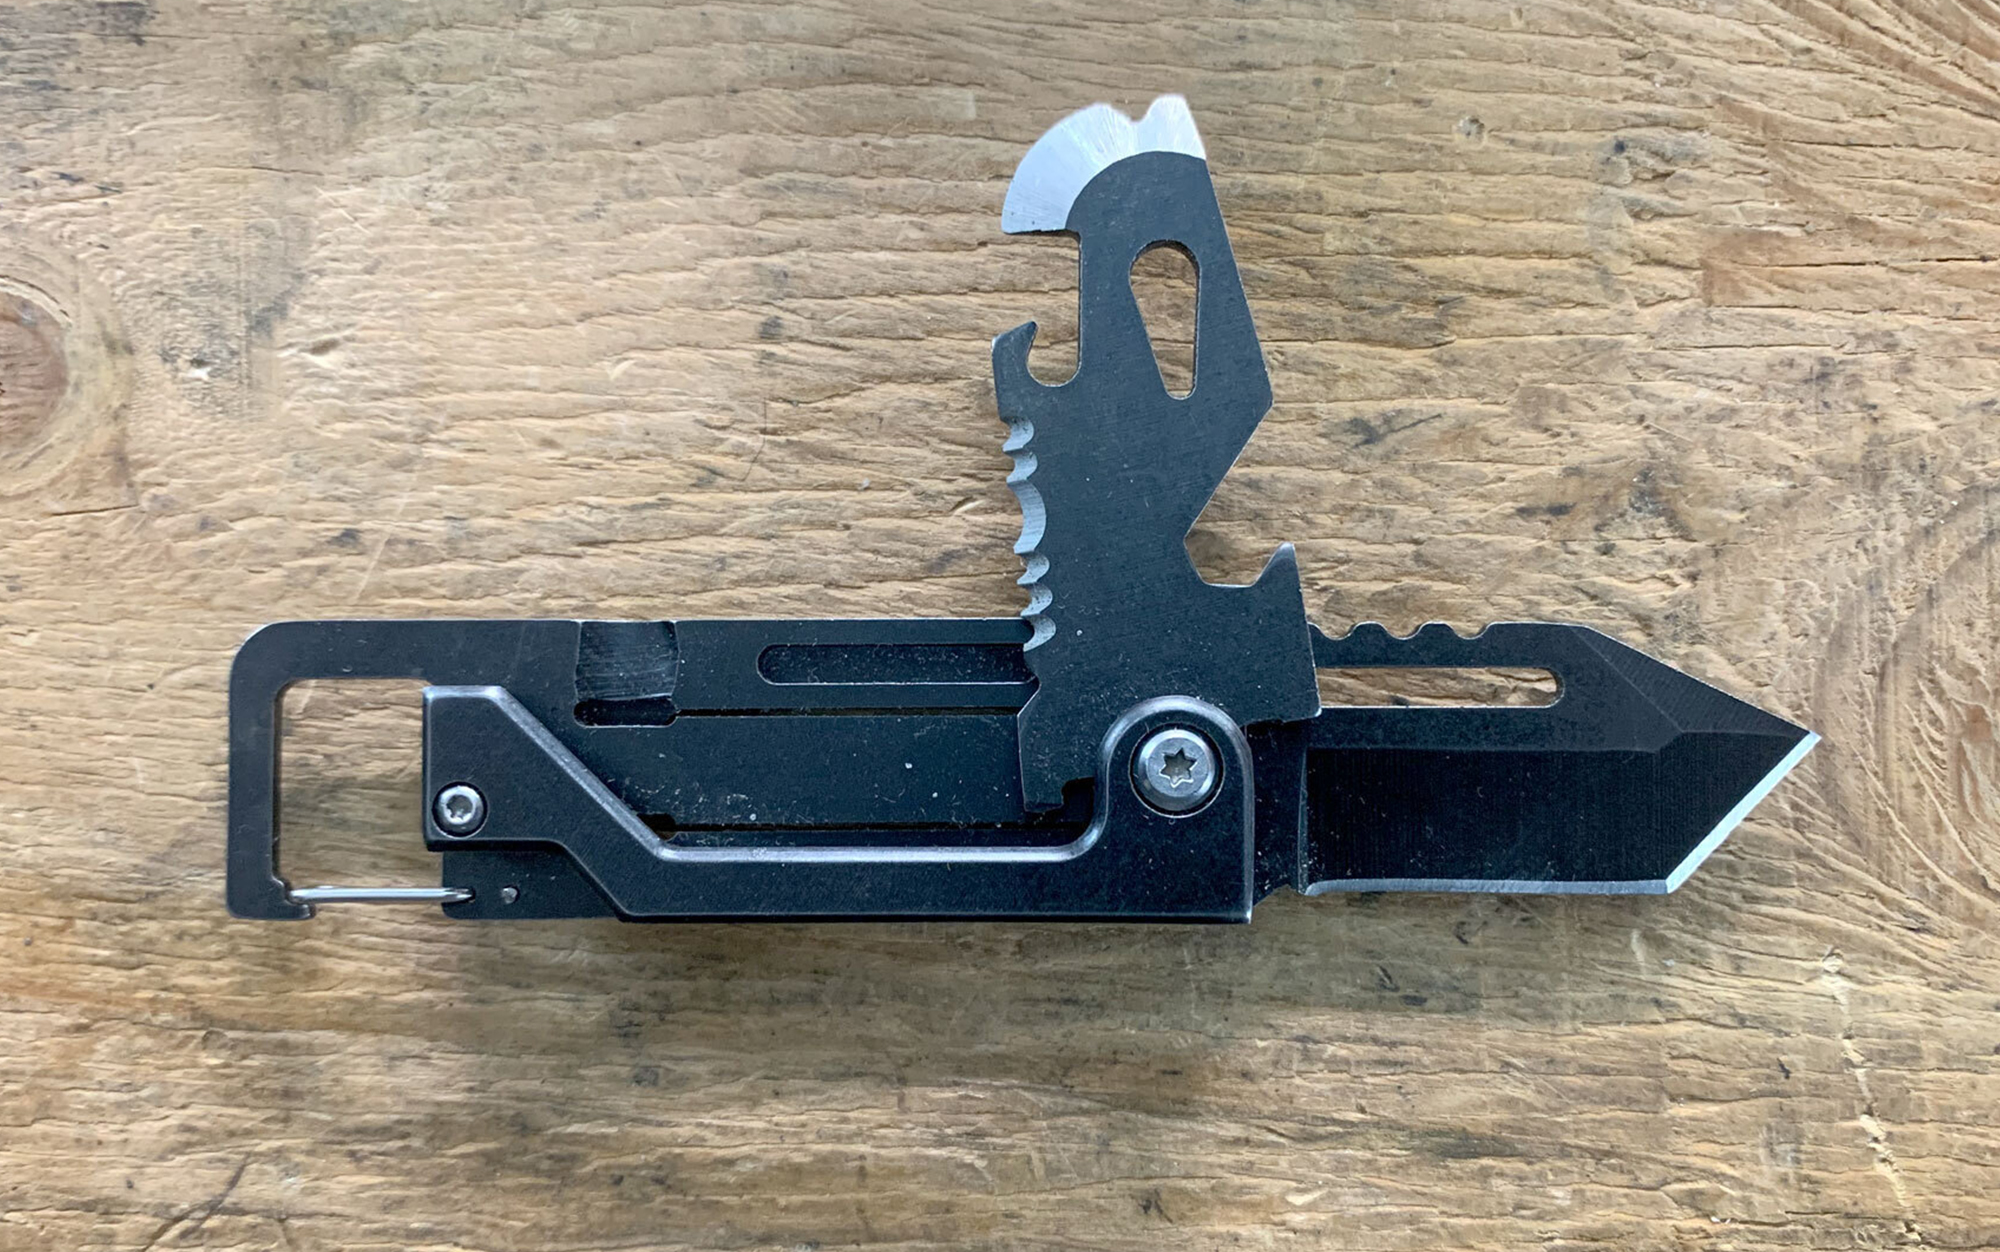 The Edcfans Keychain Multi Tool features a short, tanto-style blade, chisel/pry tip, can opener, small serrated sawing section, ¼-inch wrench, and bottle opener.